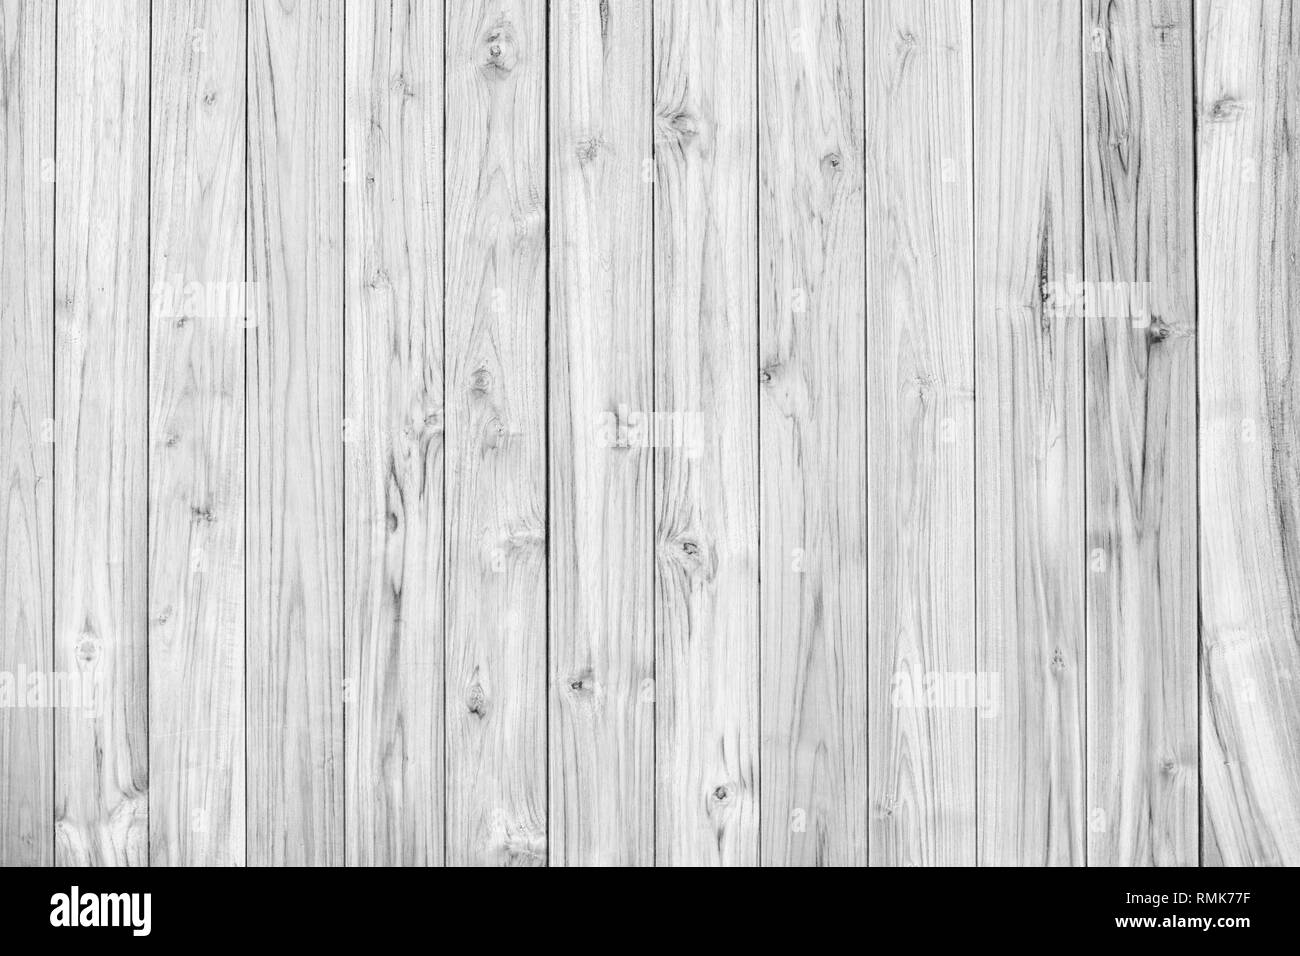 Wood Texture Background For Website